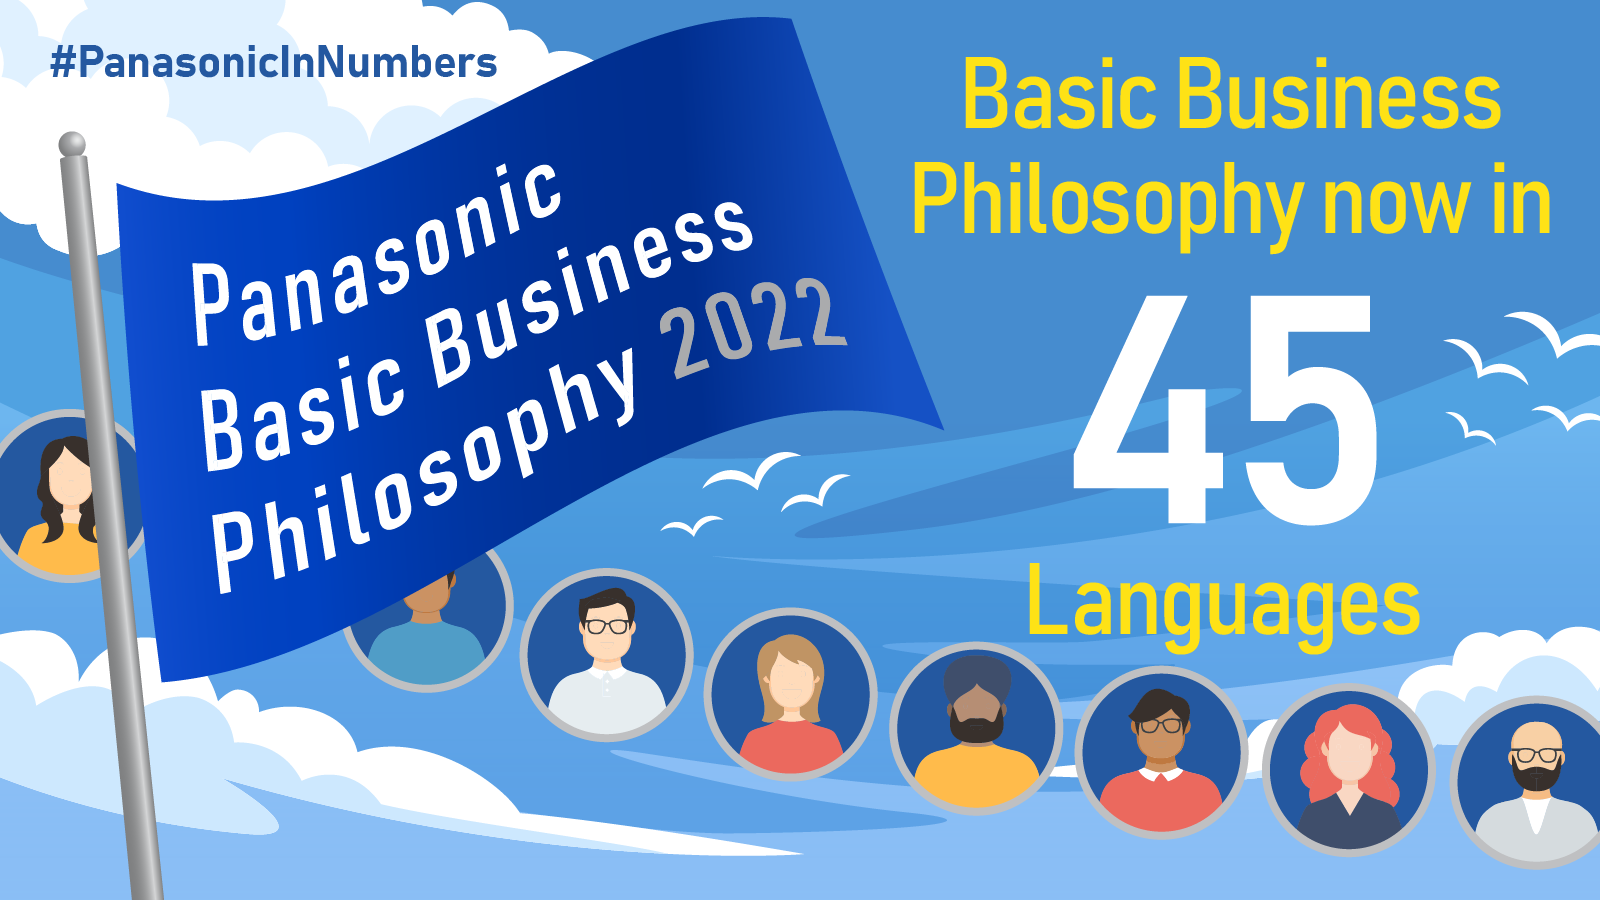 Panasonic in Numbers: Basic Business Philosophy